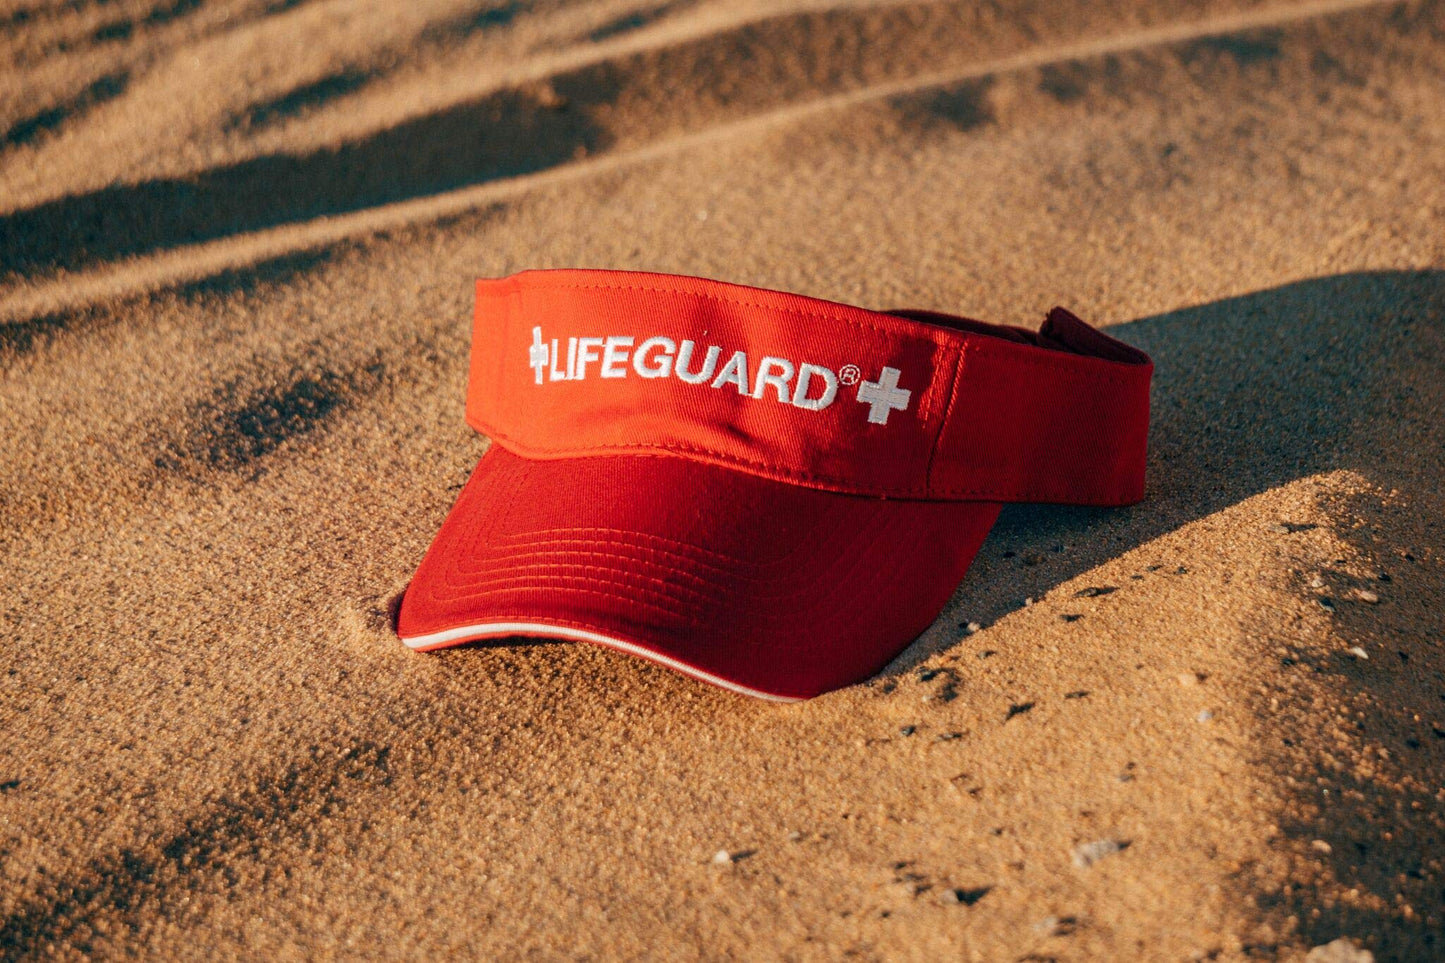 LIFEGUARD Officially Licensed Visor - Feel Comfortable - Hat for Men & Women, The Materials - One Size